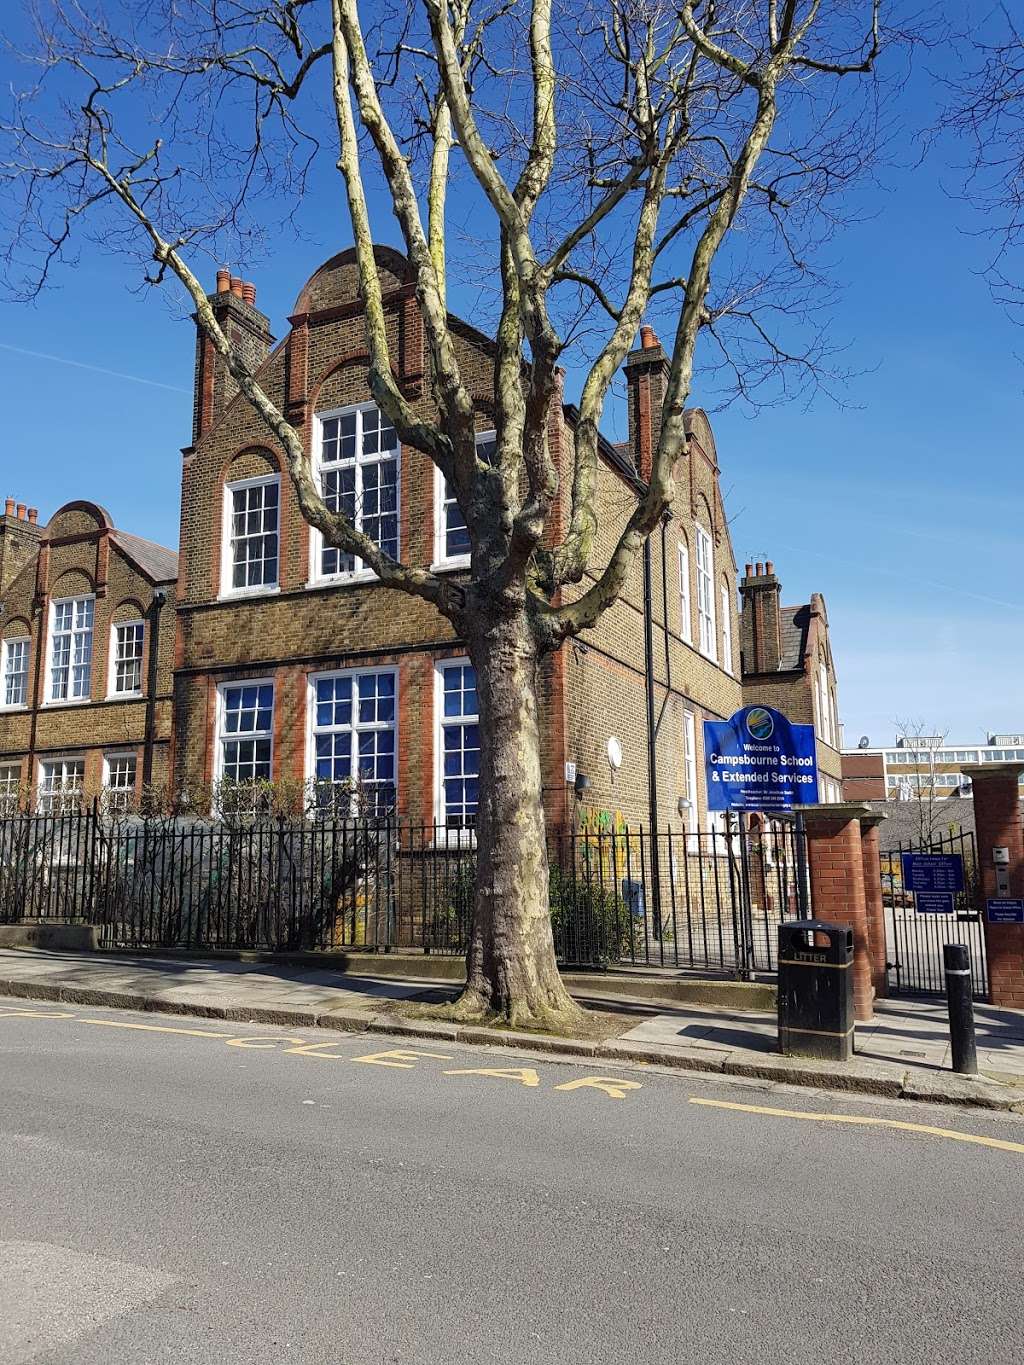 Campsbourne School and Extended Services | Nightingale Ln, London N8 7AF, UK | Phone: 020 8340 2064